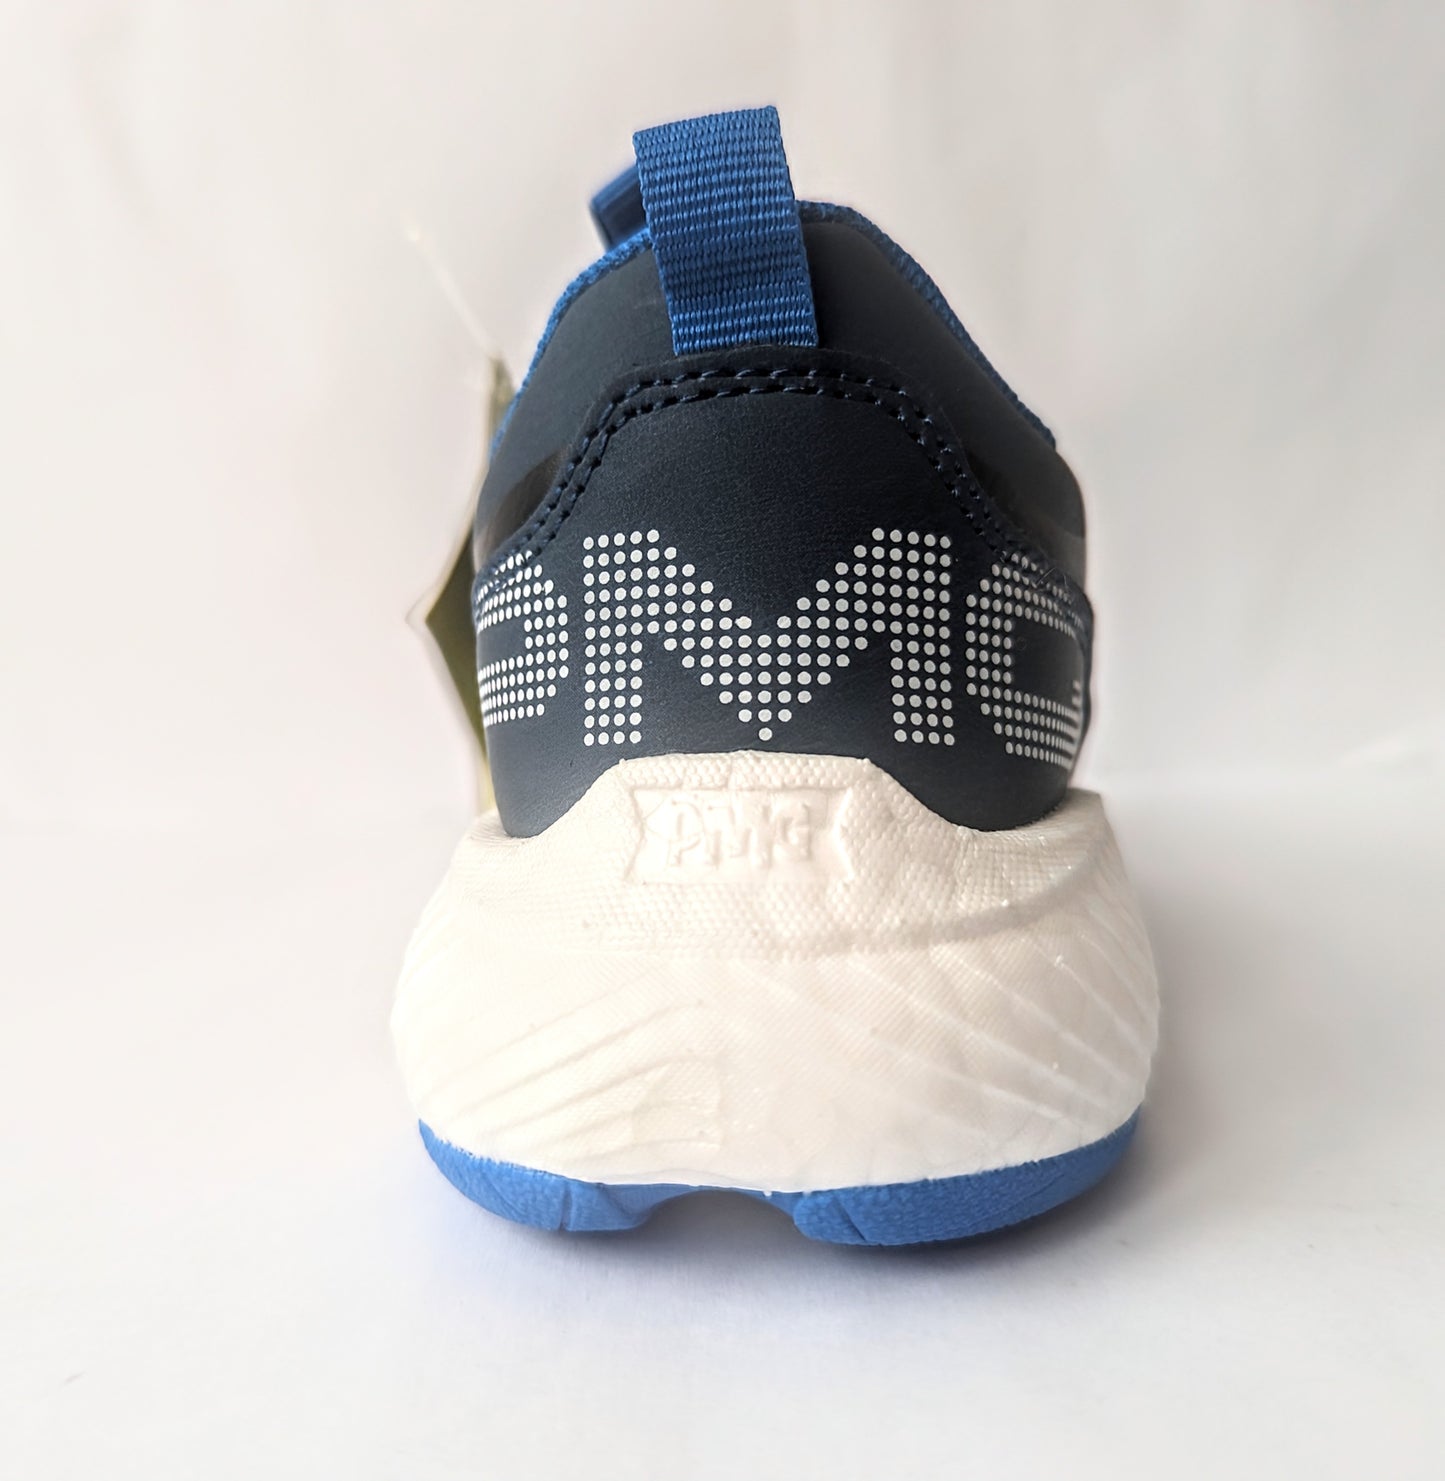 A boys trainer by Primigi, style B&G Rapid 4962511, in navy and blue with elastic lace and velcro fastening. View from back.